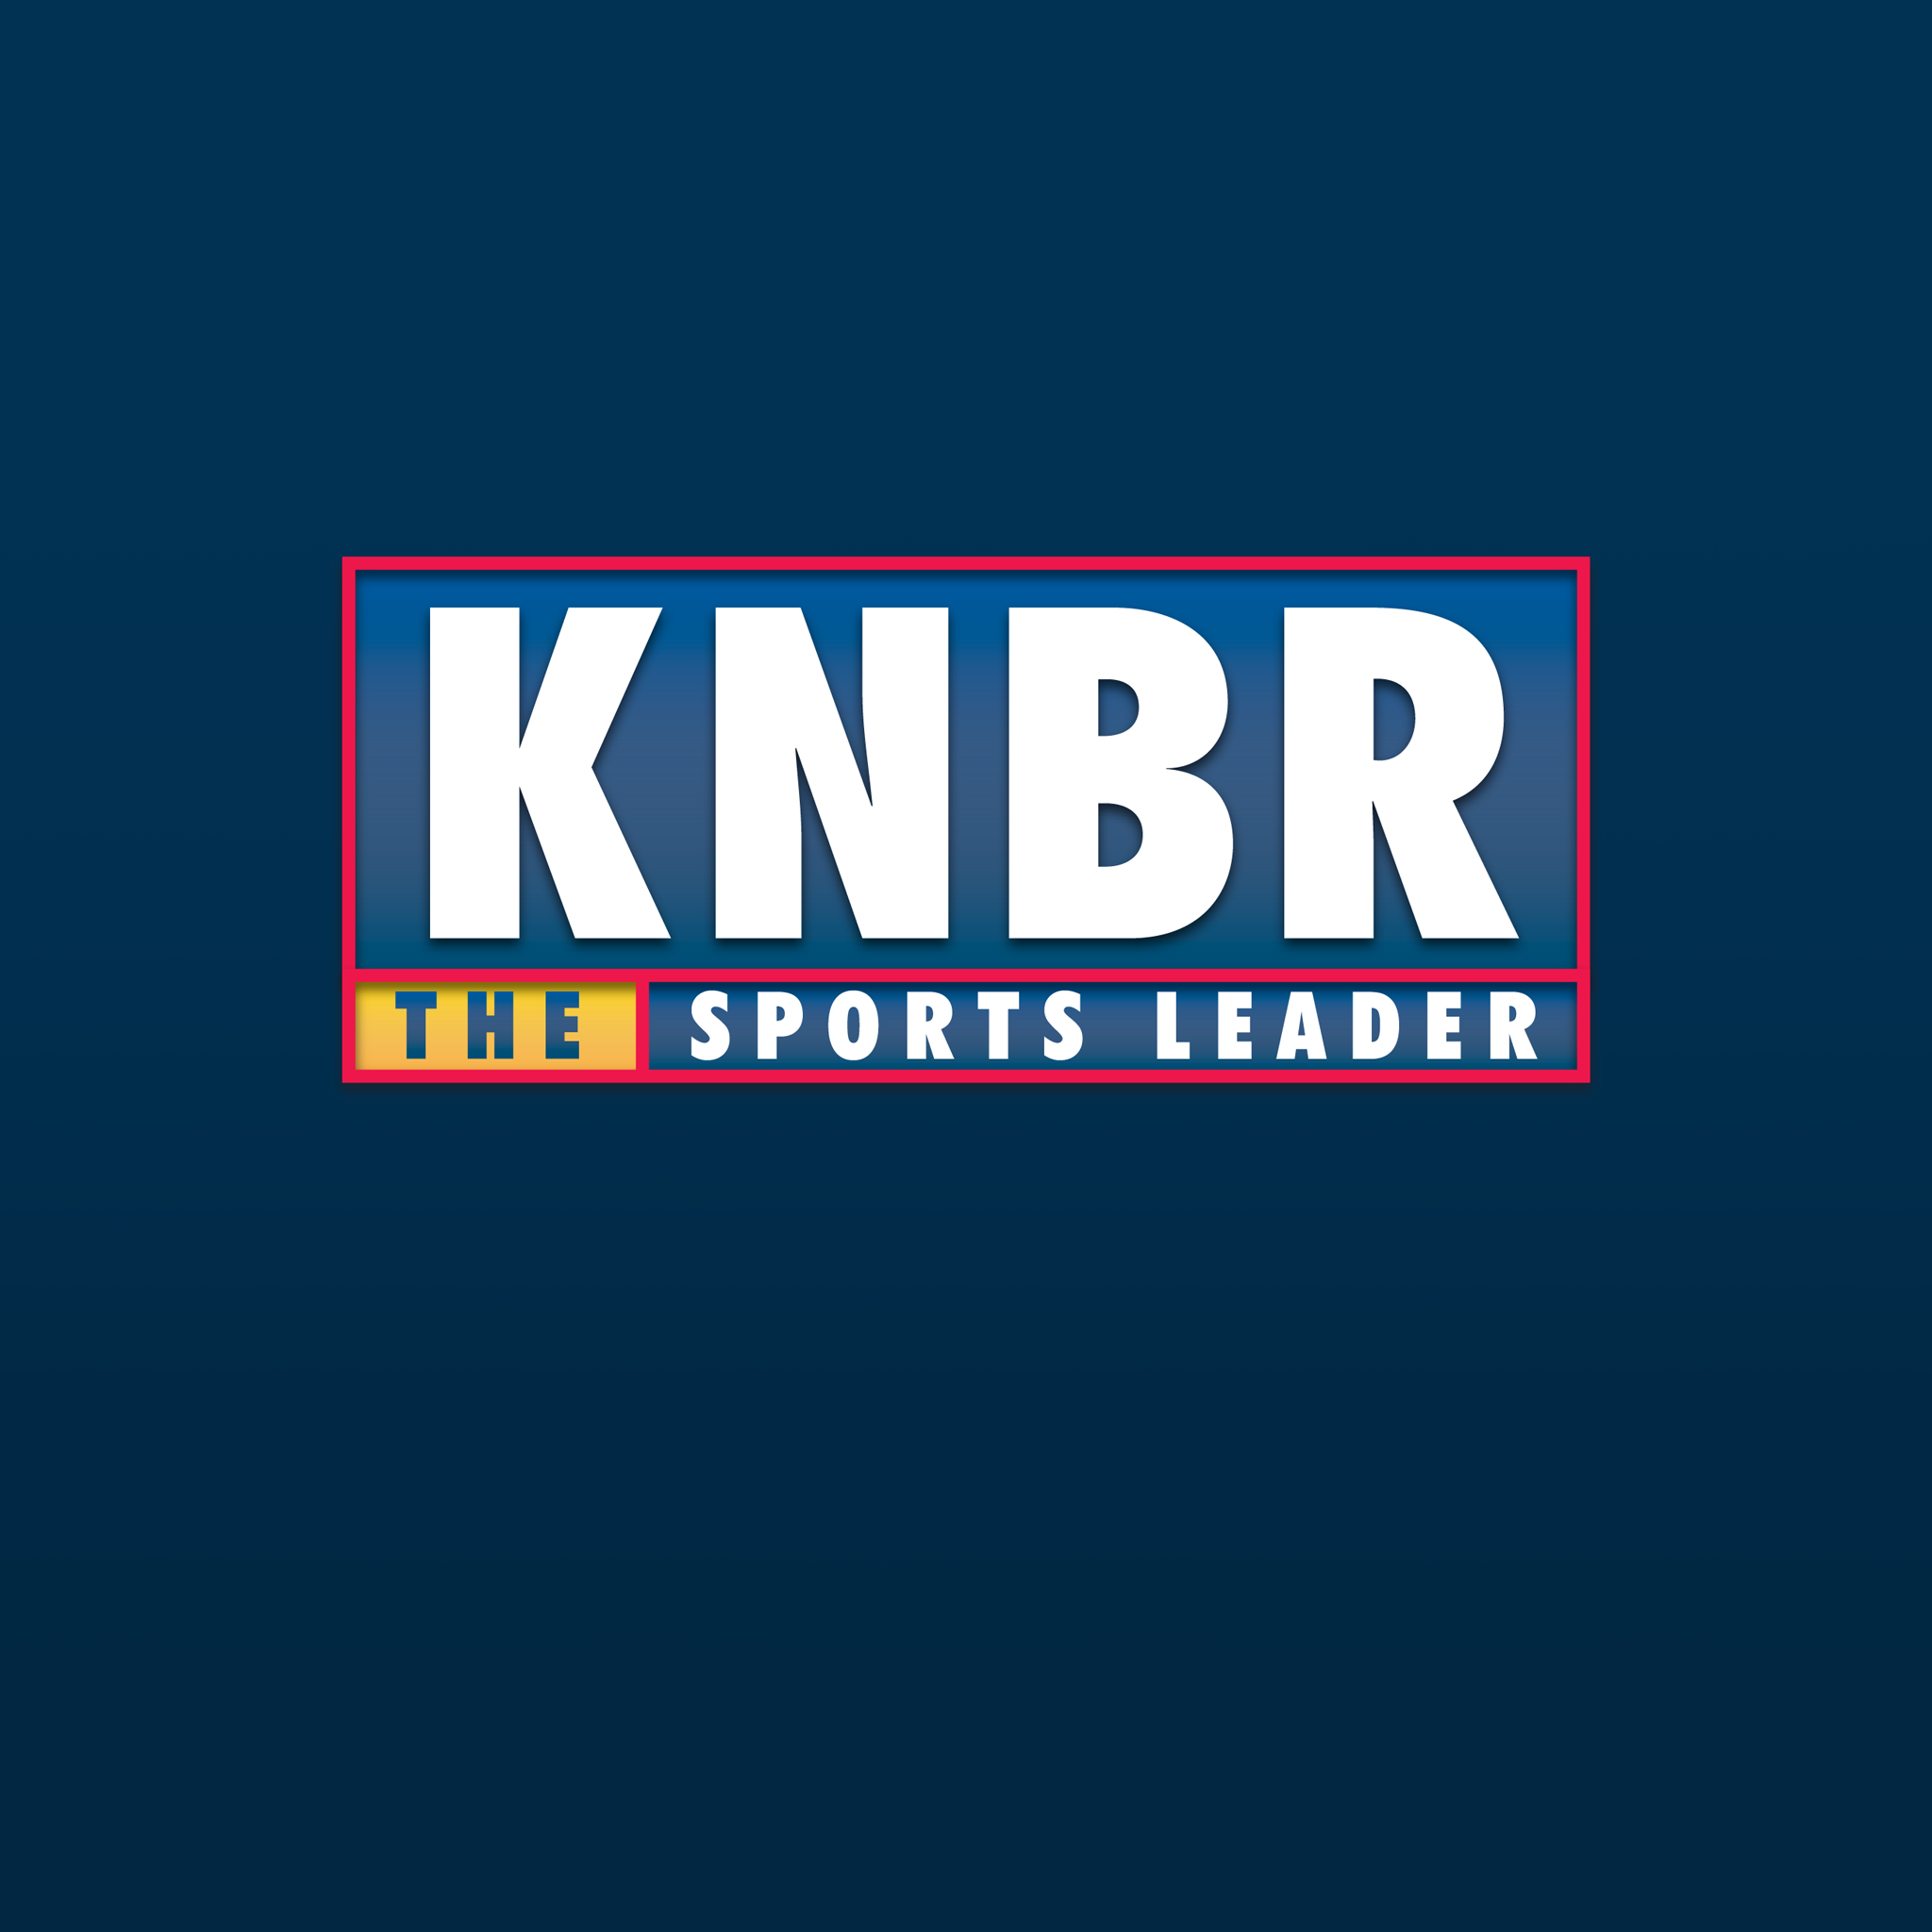 11-30 Greg Cosell joins Dieter Kurtenbach on the KNBR Morning Show to discuss what he has seen on tape from Brock Purdy and to give his perspective on the 49ers vs Eagles game this weekend